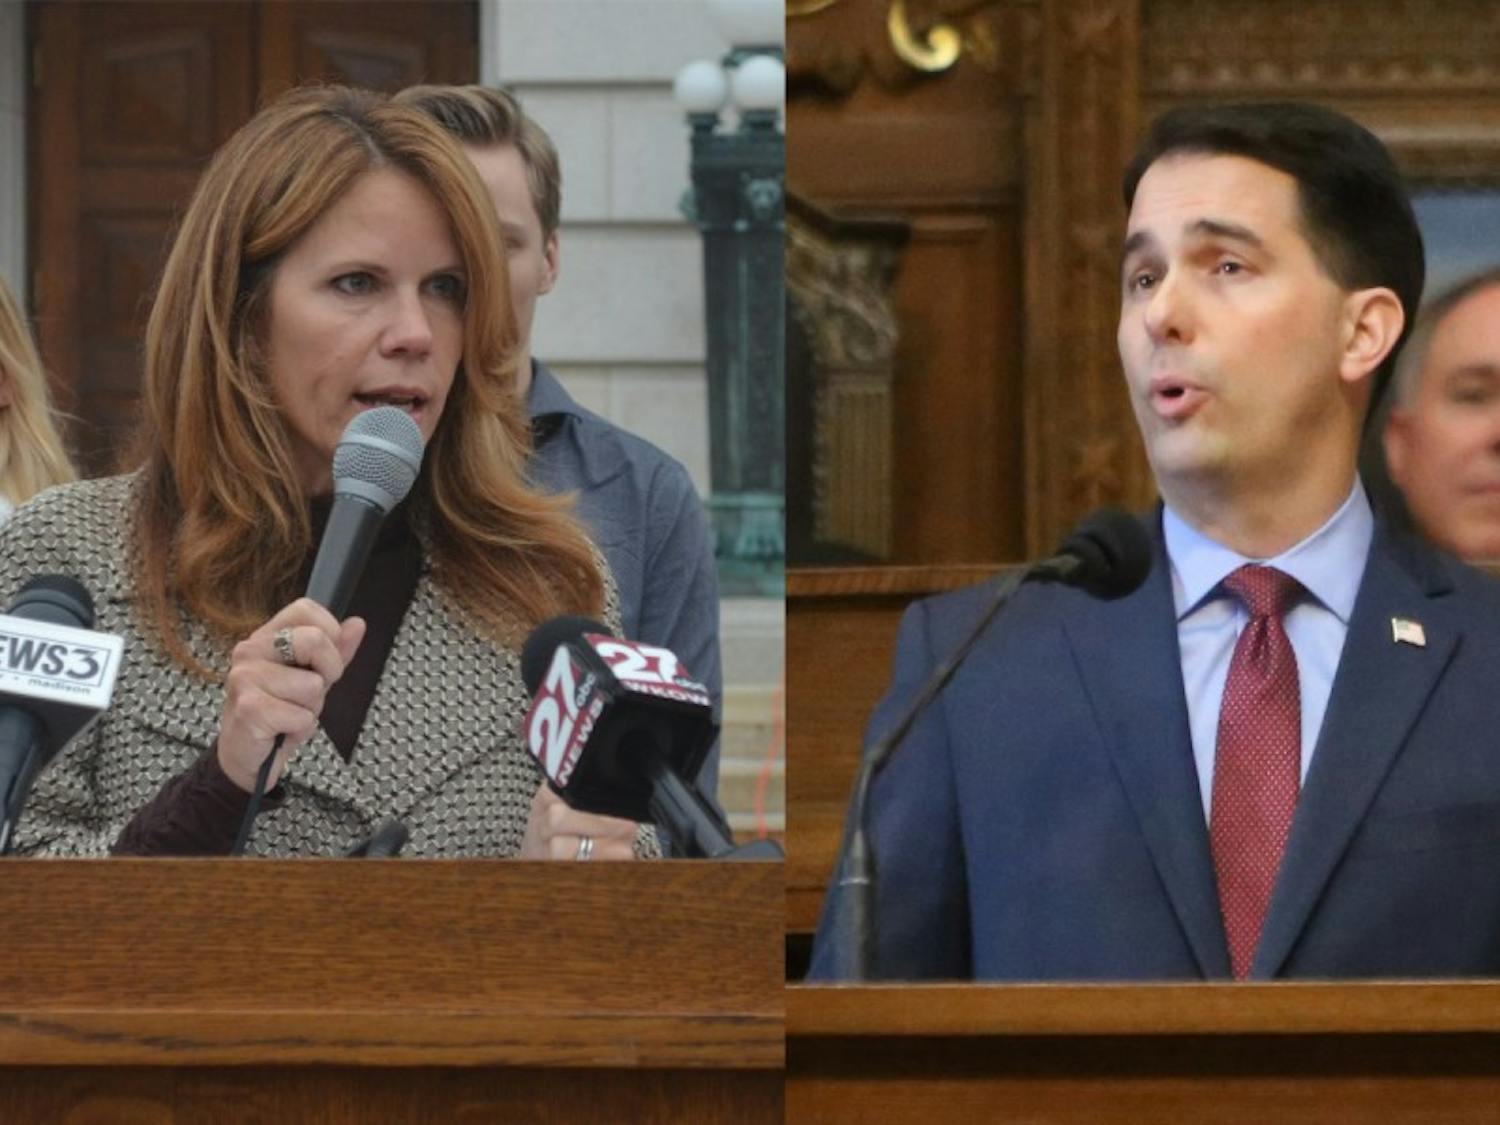 Madison Democratic Reps. Chris Taylor and Terese Berceau requested an investigation into Gov. Scott Walker’s flights around Wisconsin after a group accused the governor of using state funds for these trips.